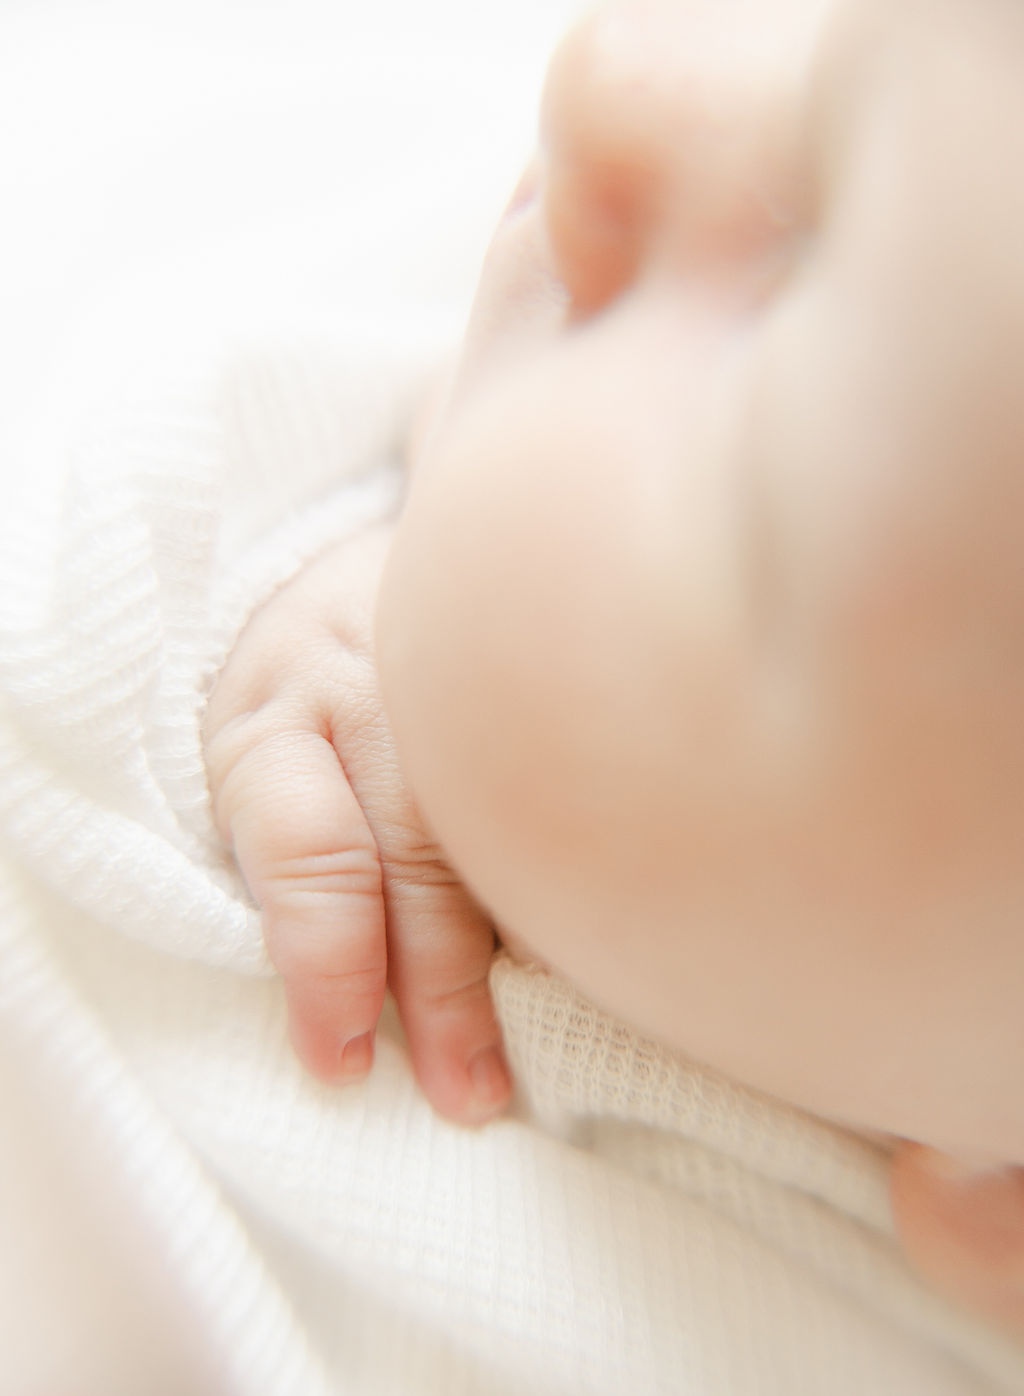 Details of a sleeping newborn baby with hand poking out of swaddle